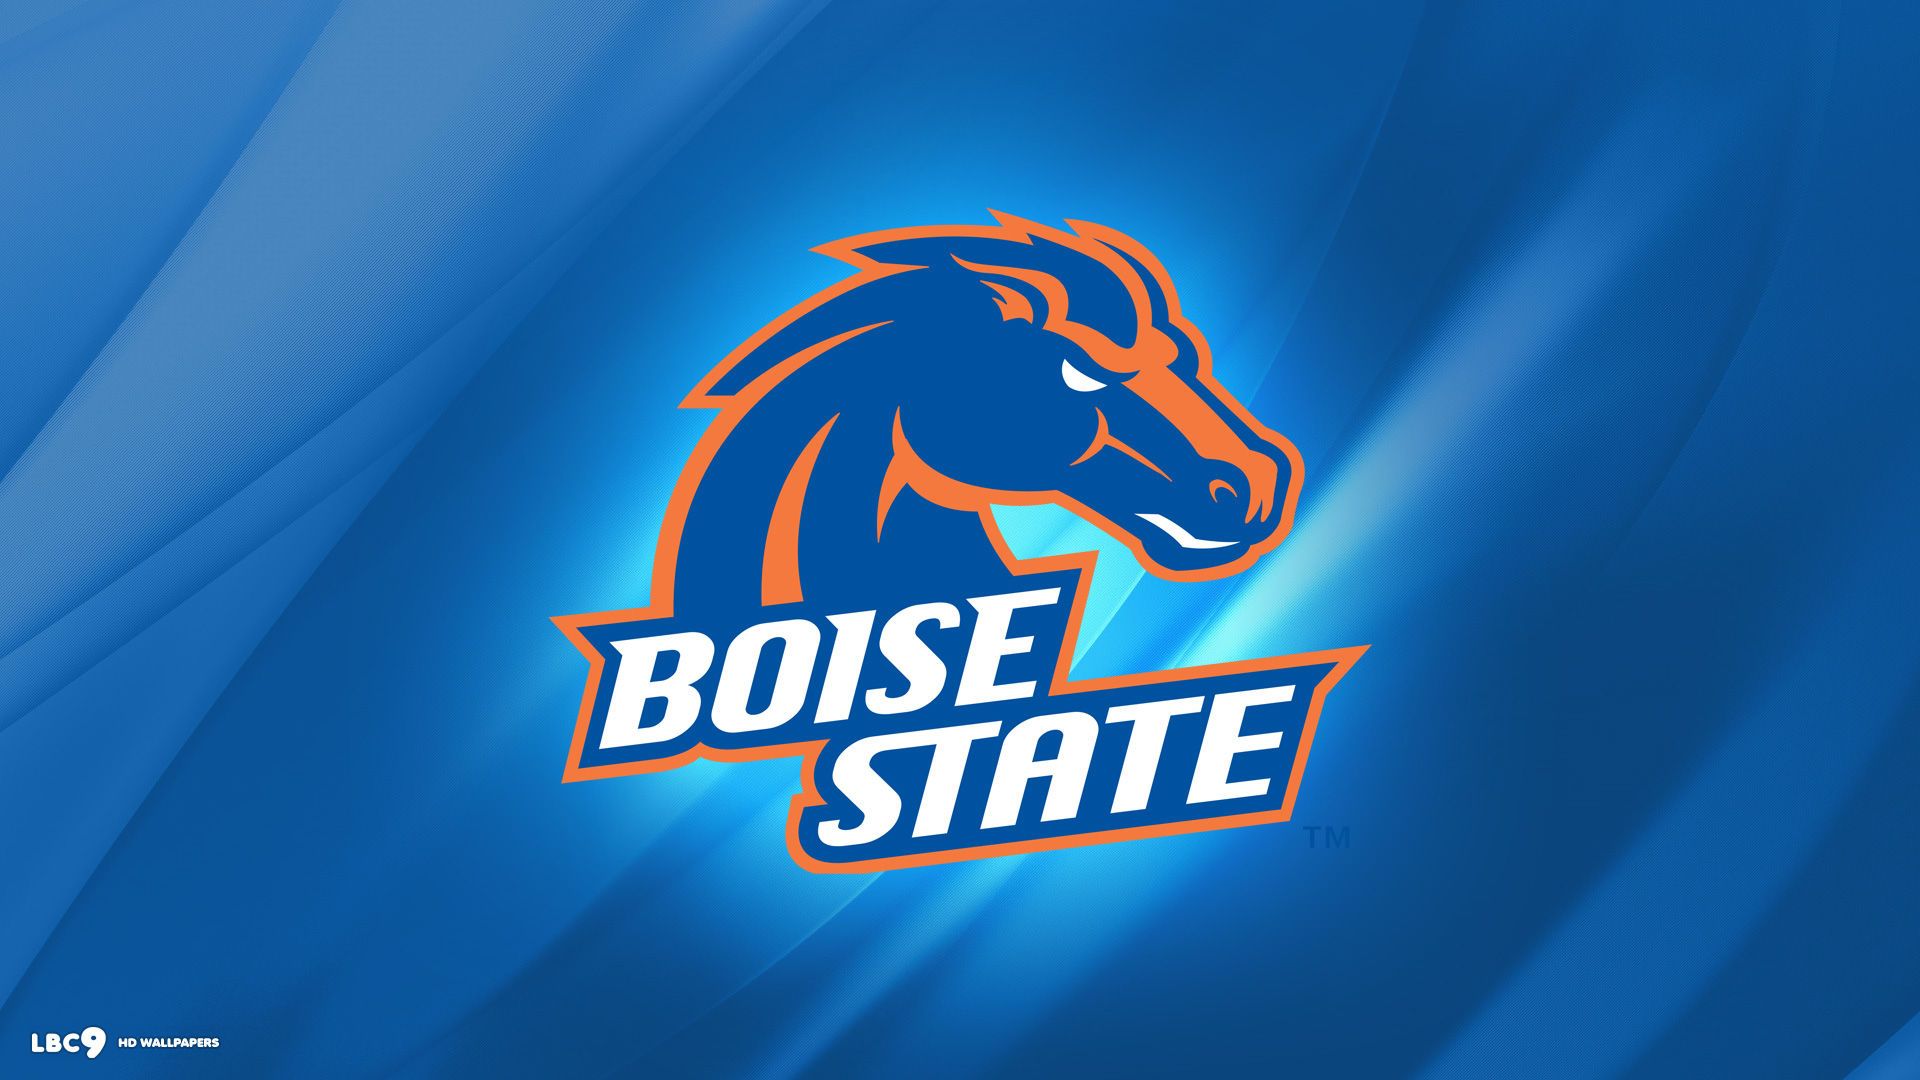 Boise state broncos wallpaper 1 / 3 college athletics hd backgrounds